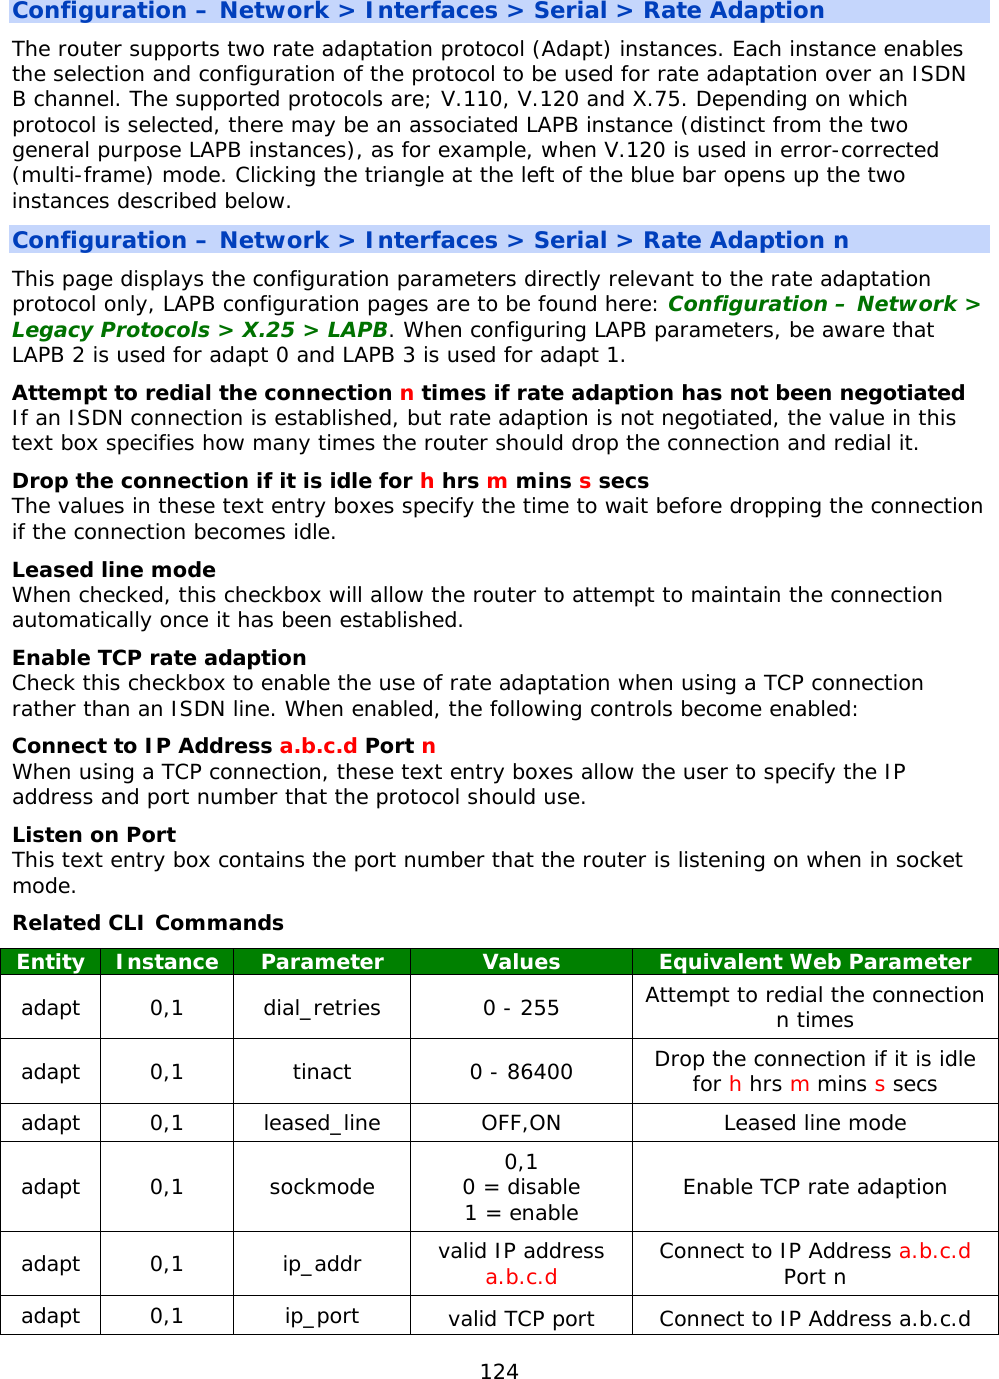 124  Configuration – Network &gt; Interfaces &gt; Serial &gt; Rate Adaption The router supports two rate adaptation protocol (Adapt) instances. Each instance enables the selection and configuration of the protocol to be used for rate adaptation over an ISDN B channel. The supported protocols are; V.110, V.120 and X.75. Depending on which protocol is selected, there may be an associated LAPB instance (distinct from the two general purpose LAPB instances), as for example, when V.120 is used in error-corrected (multi-frame) mode. Clicking the triangle at the left of the blue bar opens up the two instances described below. Configuration – Network &gt; Interfaces &gt; Serial &gt; Rate Adaption n This page displays the configuration parameters directly relevant to the rate adaptation protocol only, LAPB configuration pages are to be found here: Configuration – Network &gt; Legacy Protocols &gt; X.25 &gt; LAPB. When configuring LAPB parameters, be aware that LAPB 2 is used for adapt 0 and LAPB 3 is used for adapt 1. Attempt to redial the connection n times if rate adaption has not been negotiated If an ISDN connection is established, but rate adaption is not negotiated, the value in this text box specifies how many times the router should drop the connection and redial it. Drop the connection if it is idle for h hrs m mins s secs The values in these text entry boxes specify the time to wait before dropping the connection if the connection becomes idle. Leased line mode When checked, this checkbox will allow the router to attempt to maintain the connection automatically once it has been established. Enable TCP rate adaption Check this checkbox to enable the use of rate adaptation when using a TCP connection rather than an ISDN line. When enabled, the following controls become enabled: Connect to IP Address a.b.c.d Port n When using a TCP connection, these text entry boxes allow the user to specify the IP address and port number that the protocol should use. Listen on Port This text entry box contains the port number that the router is listening on when in socket mode. Related CLI Commands Entity Instance Parameter Values Equivalent Web Parameter adapt 0,1 dial_retries 0 - 255 Attempt to redial the connection n times adapt 0,1 tinact 0 - 86400 Drop the connection if it is idle for h hrs m mins s secs adapt 0,1 leased_line OFF,ON Leased line mode adapt 0,1  sockmode  0,1 0 = disable 1 = enable Enable TCP rate adaption adapt 0,1  ip_addr  valid IP address a.b.c.d Connect to IP Address a.b.c.d Port n adapt 0,1 ip_port valid TCP port  Connect to IP Address a.b.c.d 